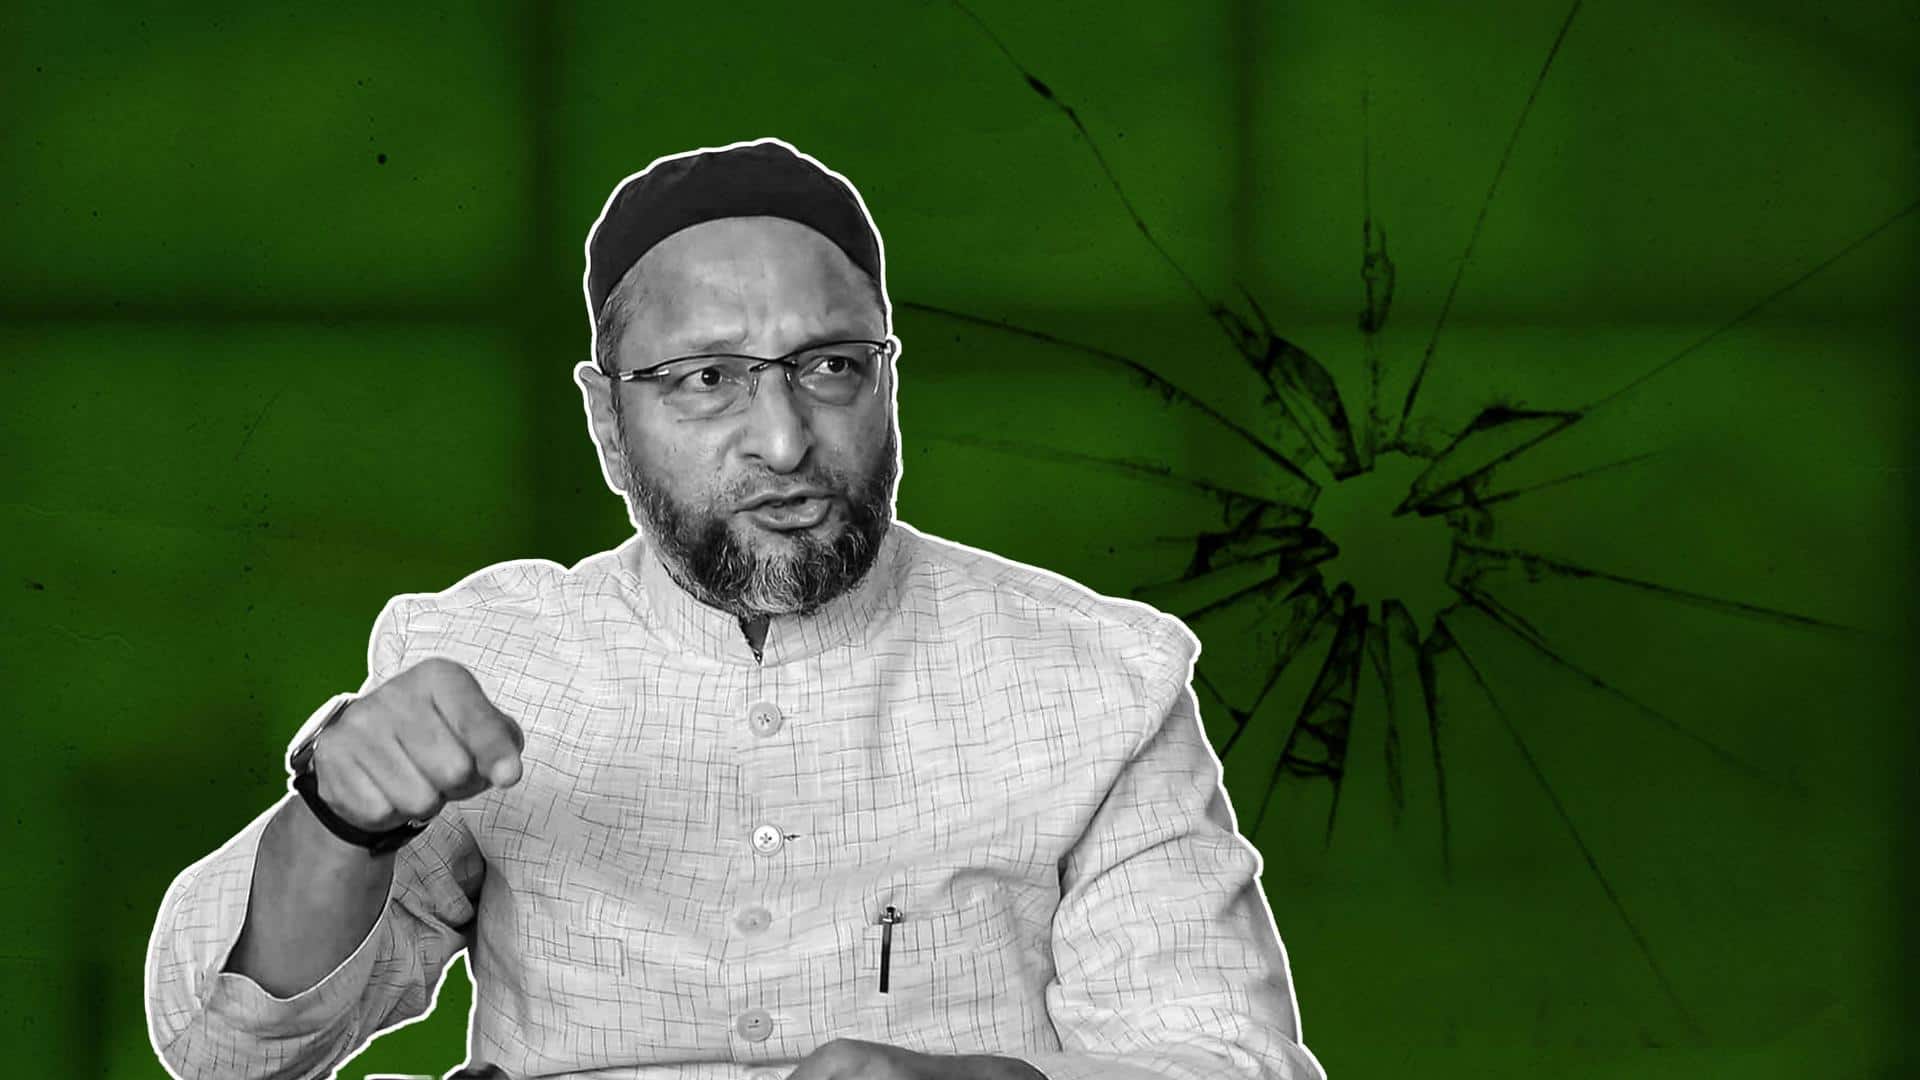 'It's concerning': Asaduddin Owaisi after Delhi house attacked with stones